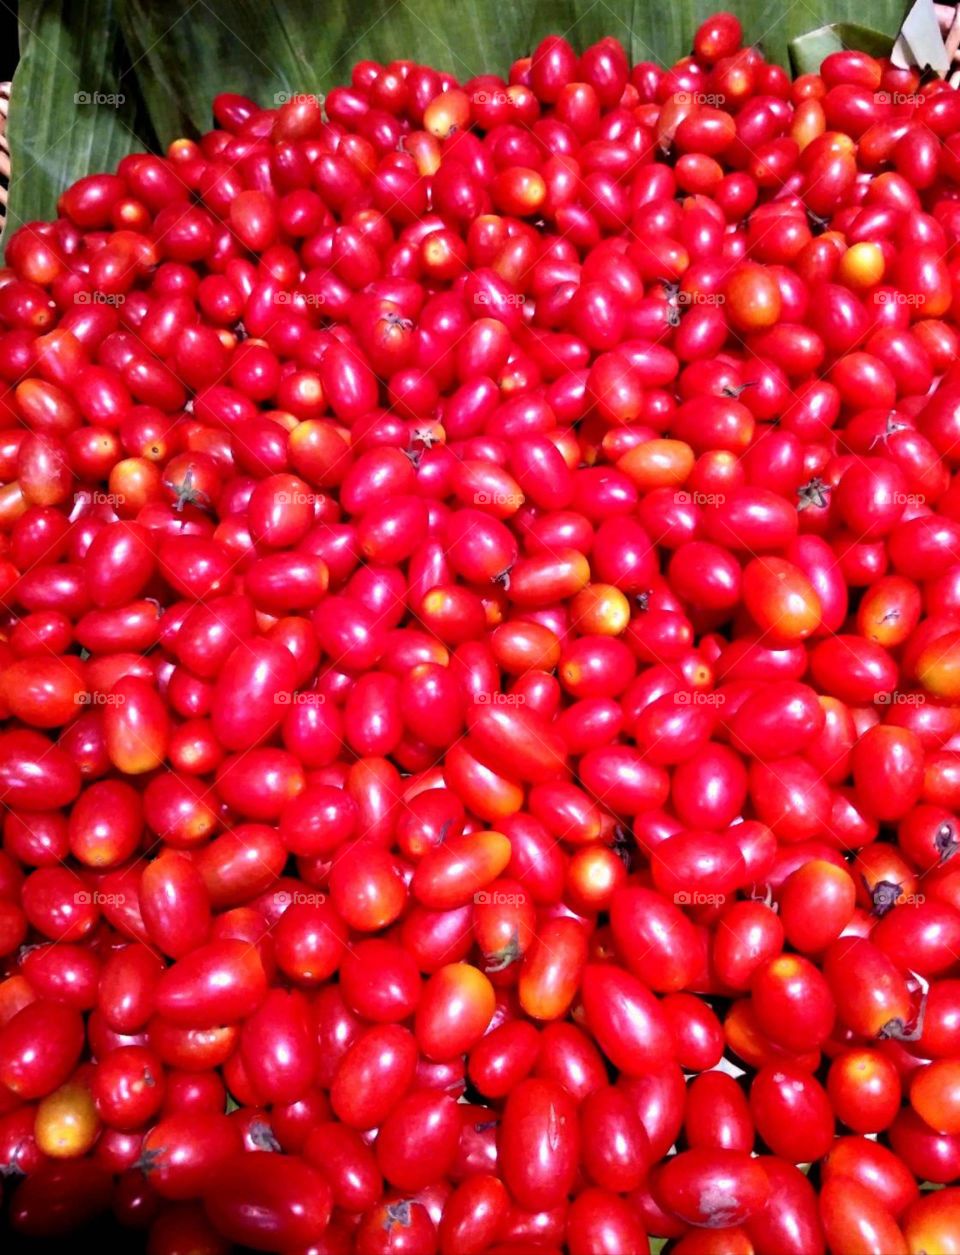 Cherry tomatoes for sale in the market.